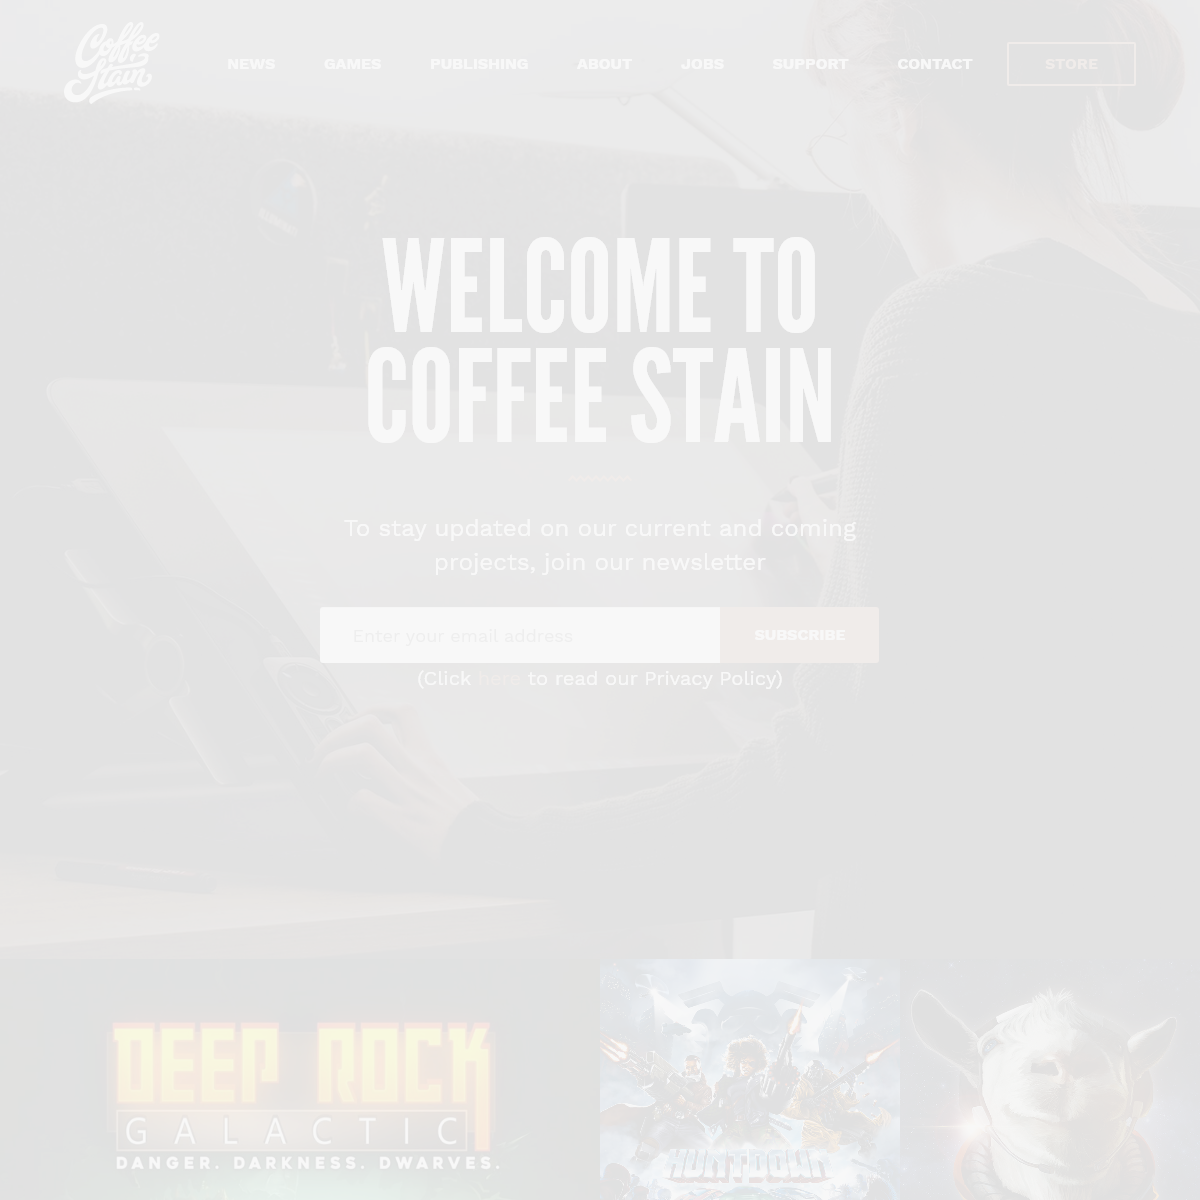 A complete backup of coffeestainstudios.com